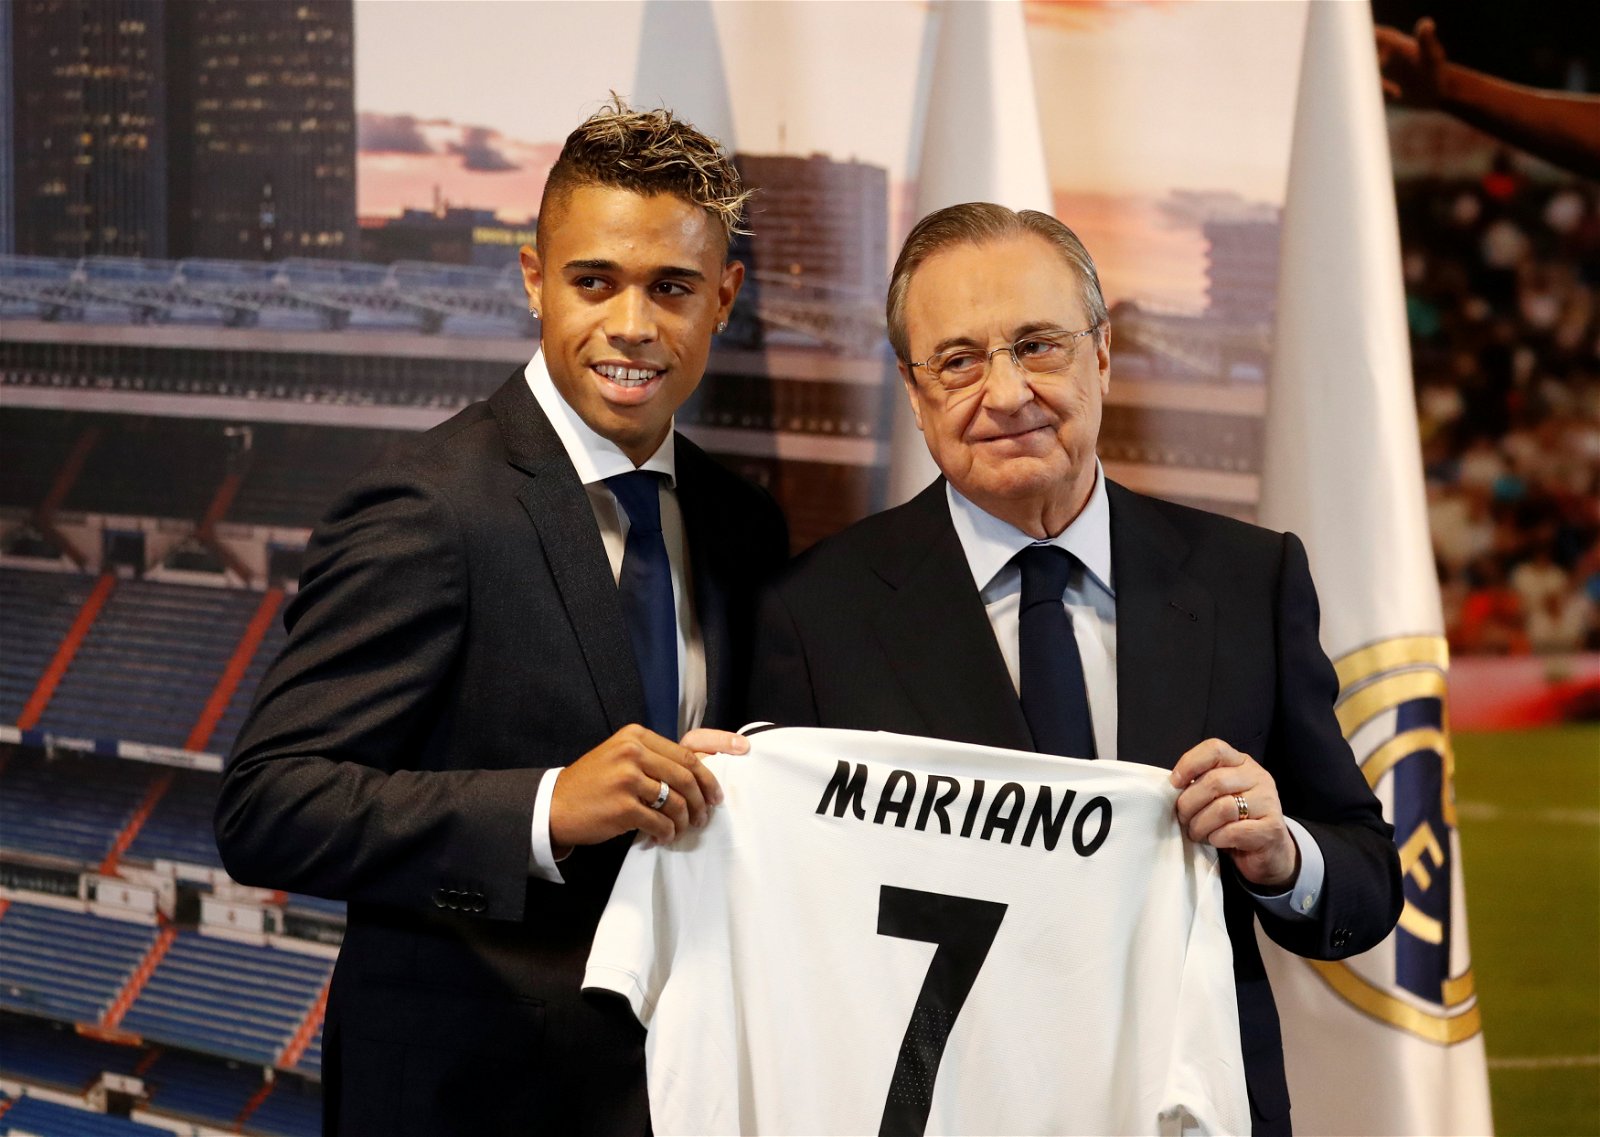 Real Madrid striker Mariano Diaz to leave on loan - Agent